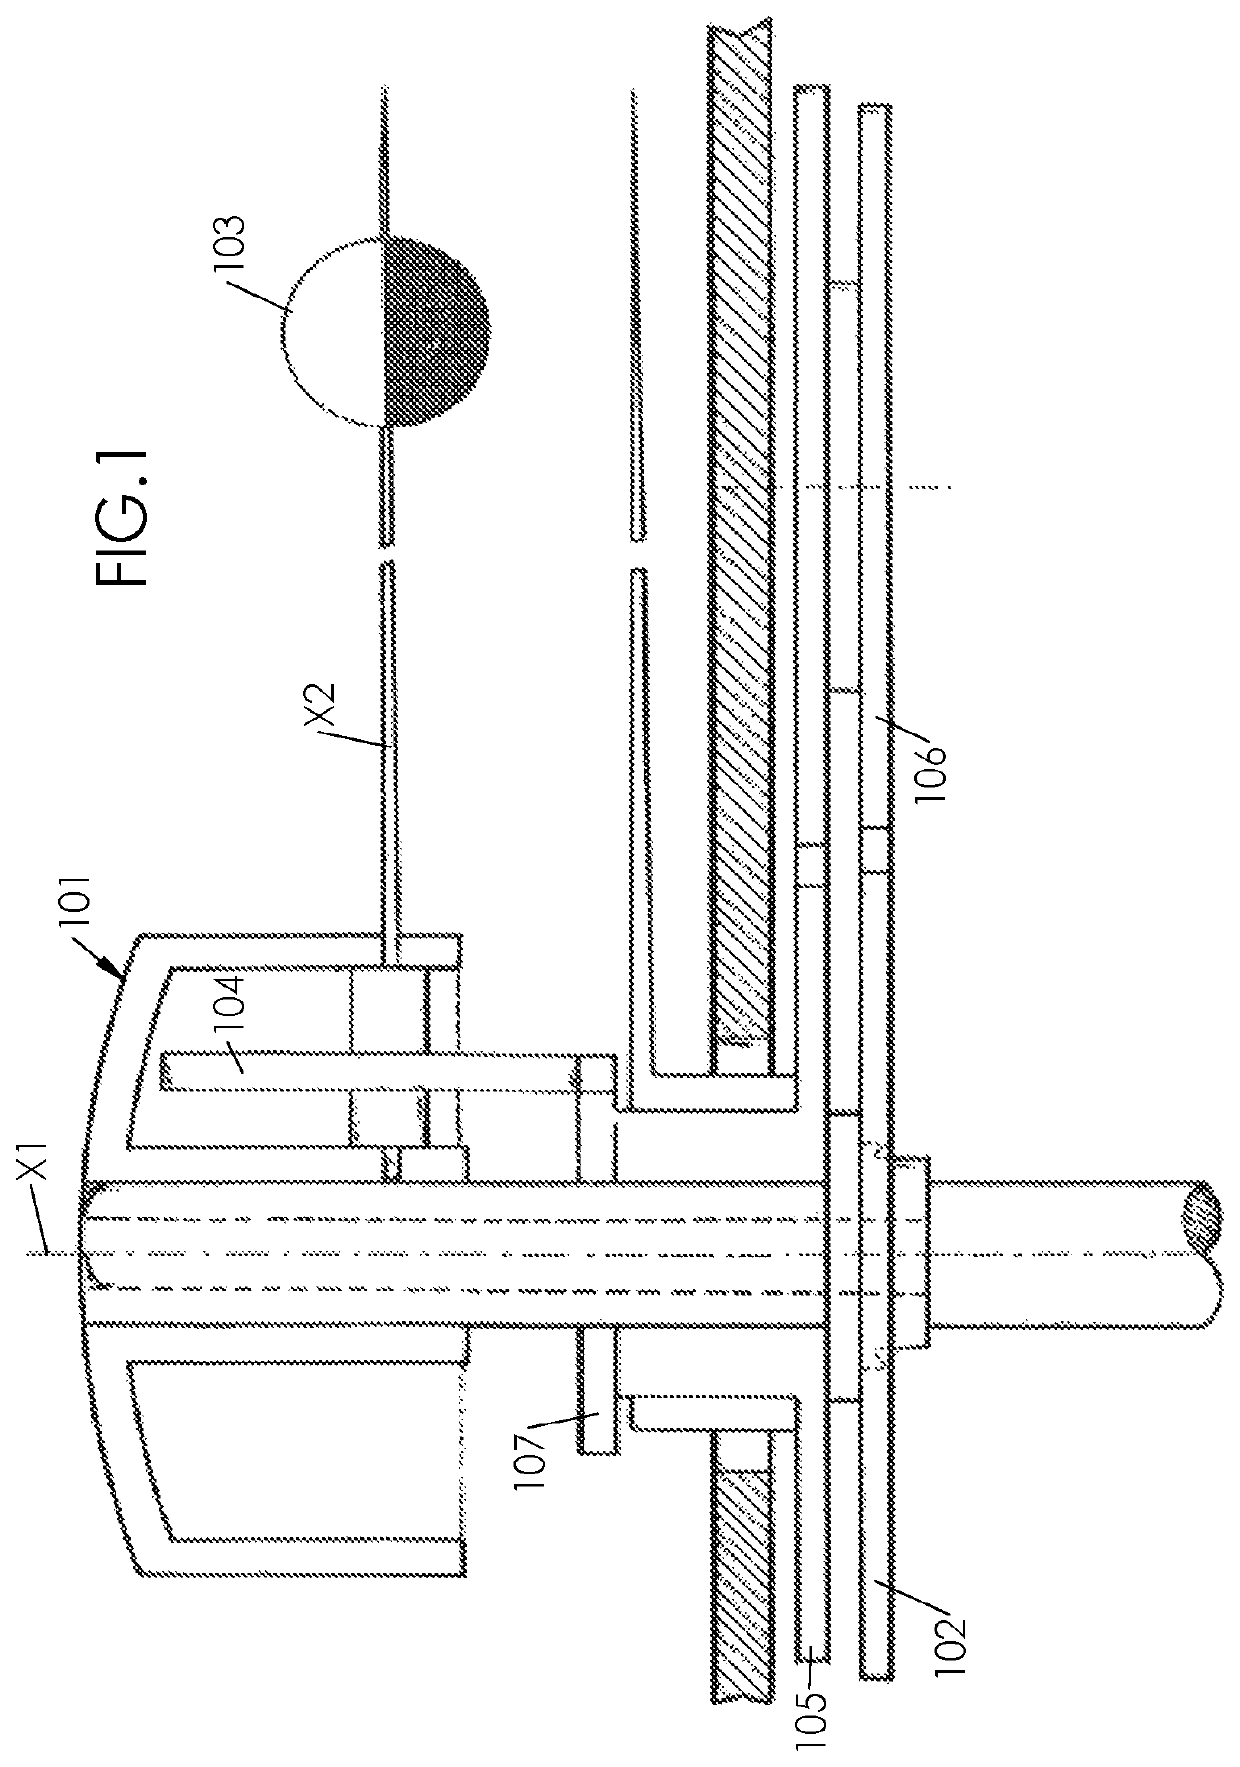 Timepiece mechanism for displaying the lunar day and moon phase, with a correction system using a double kinematic chain